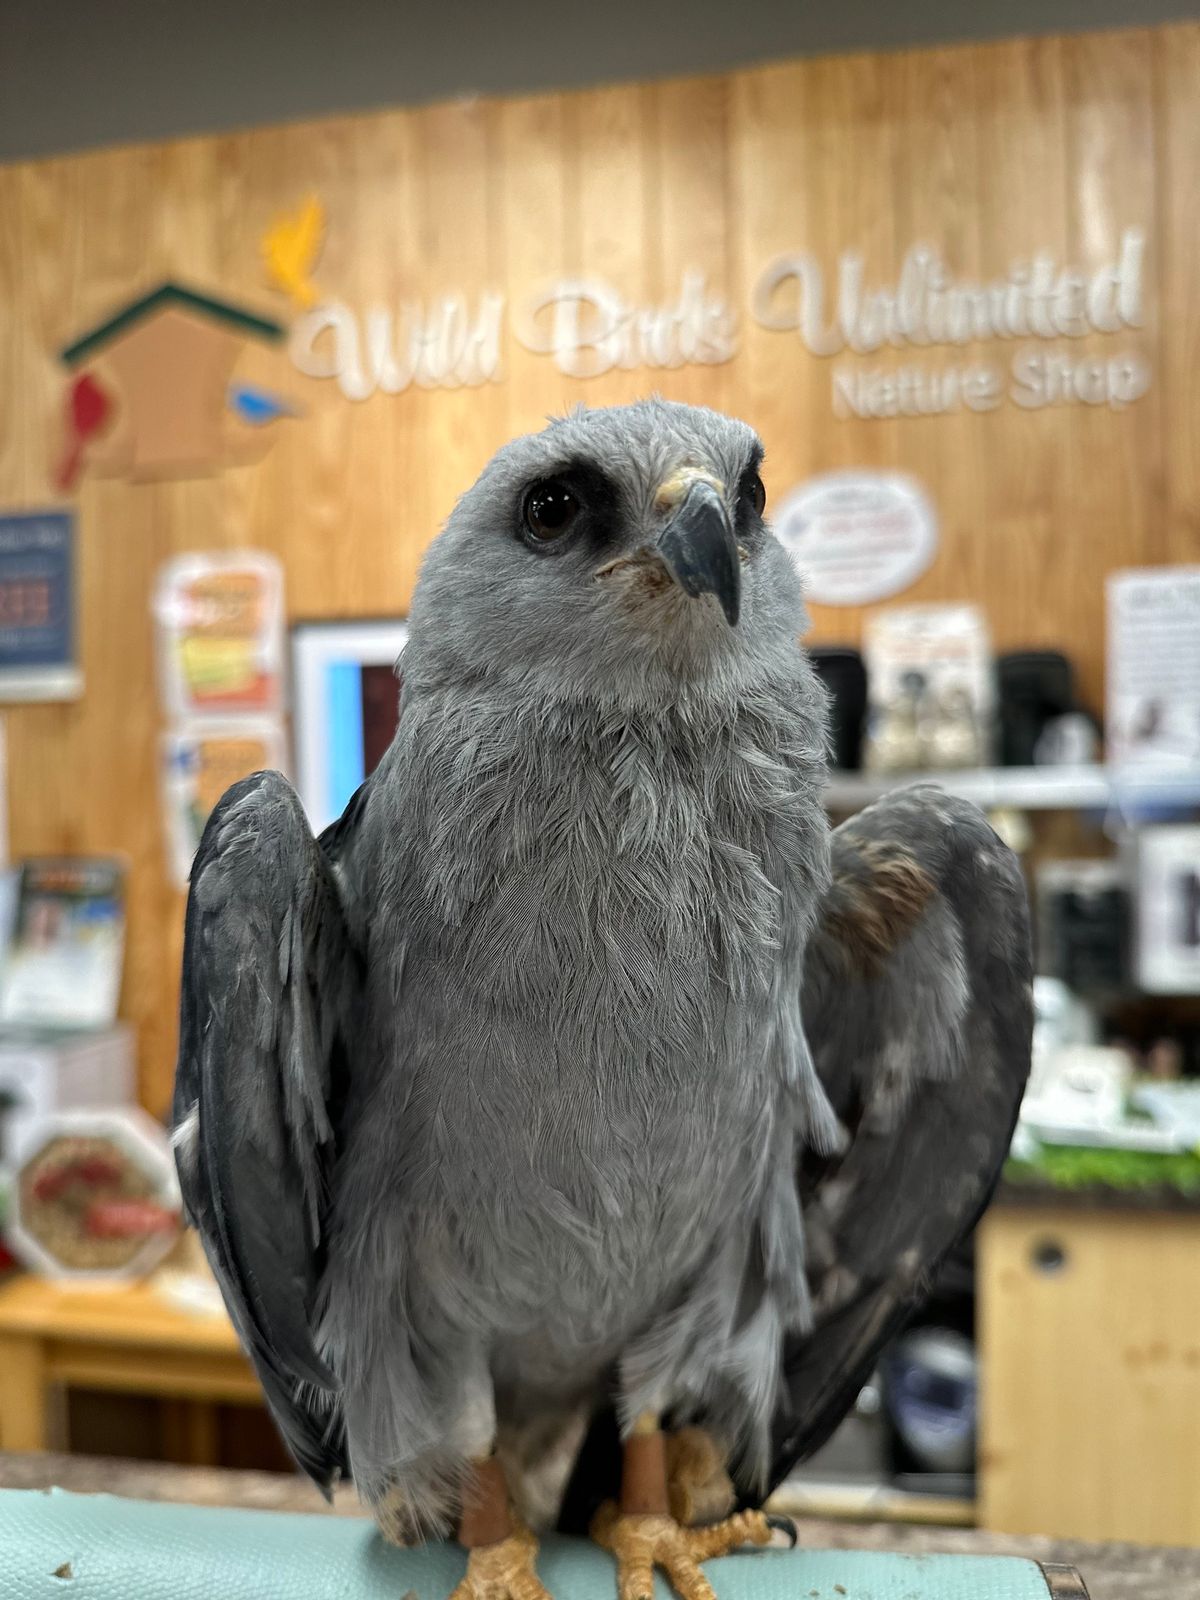 CLAWS at Wild Birds Unlimited Chapel Hill